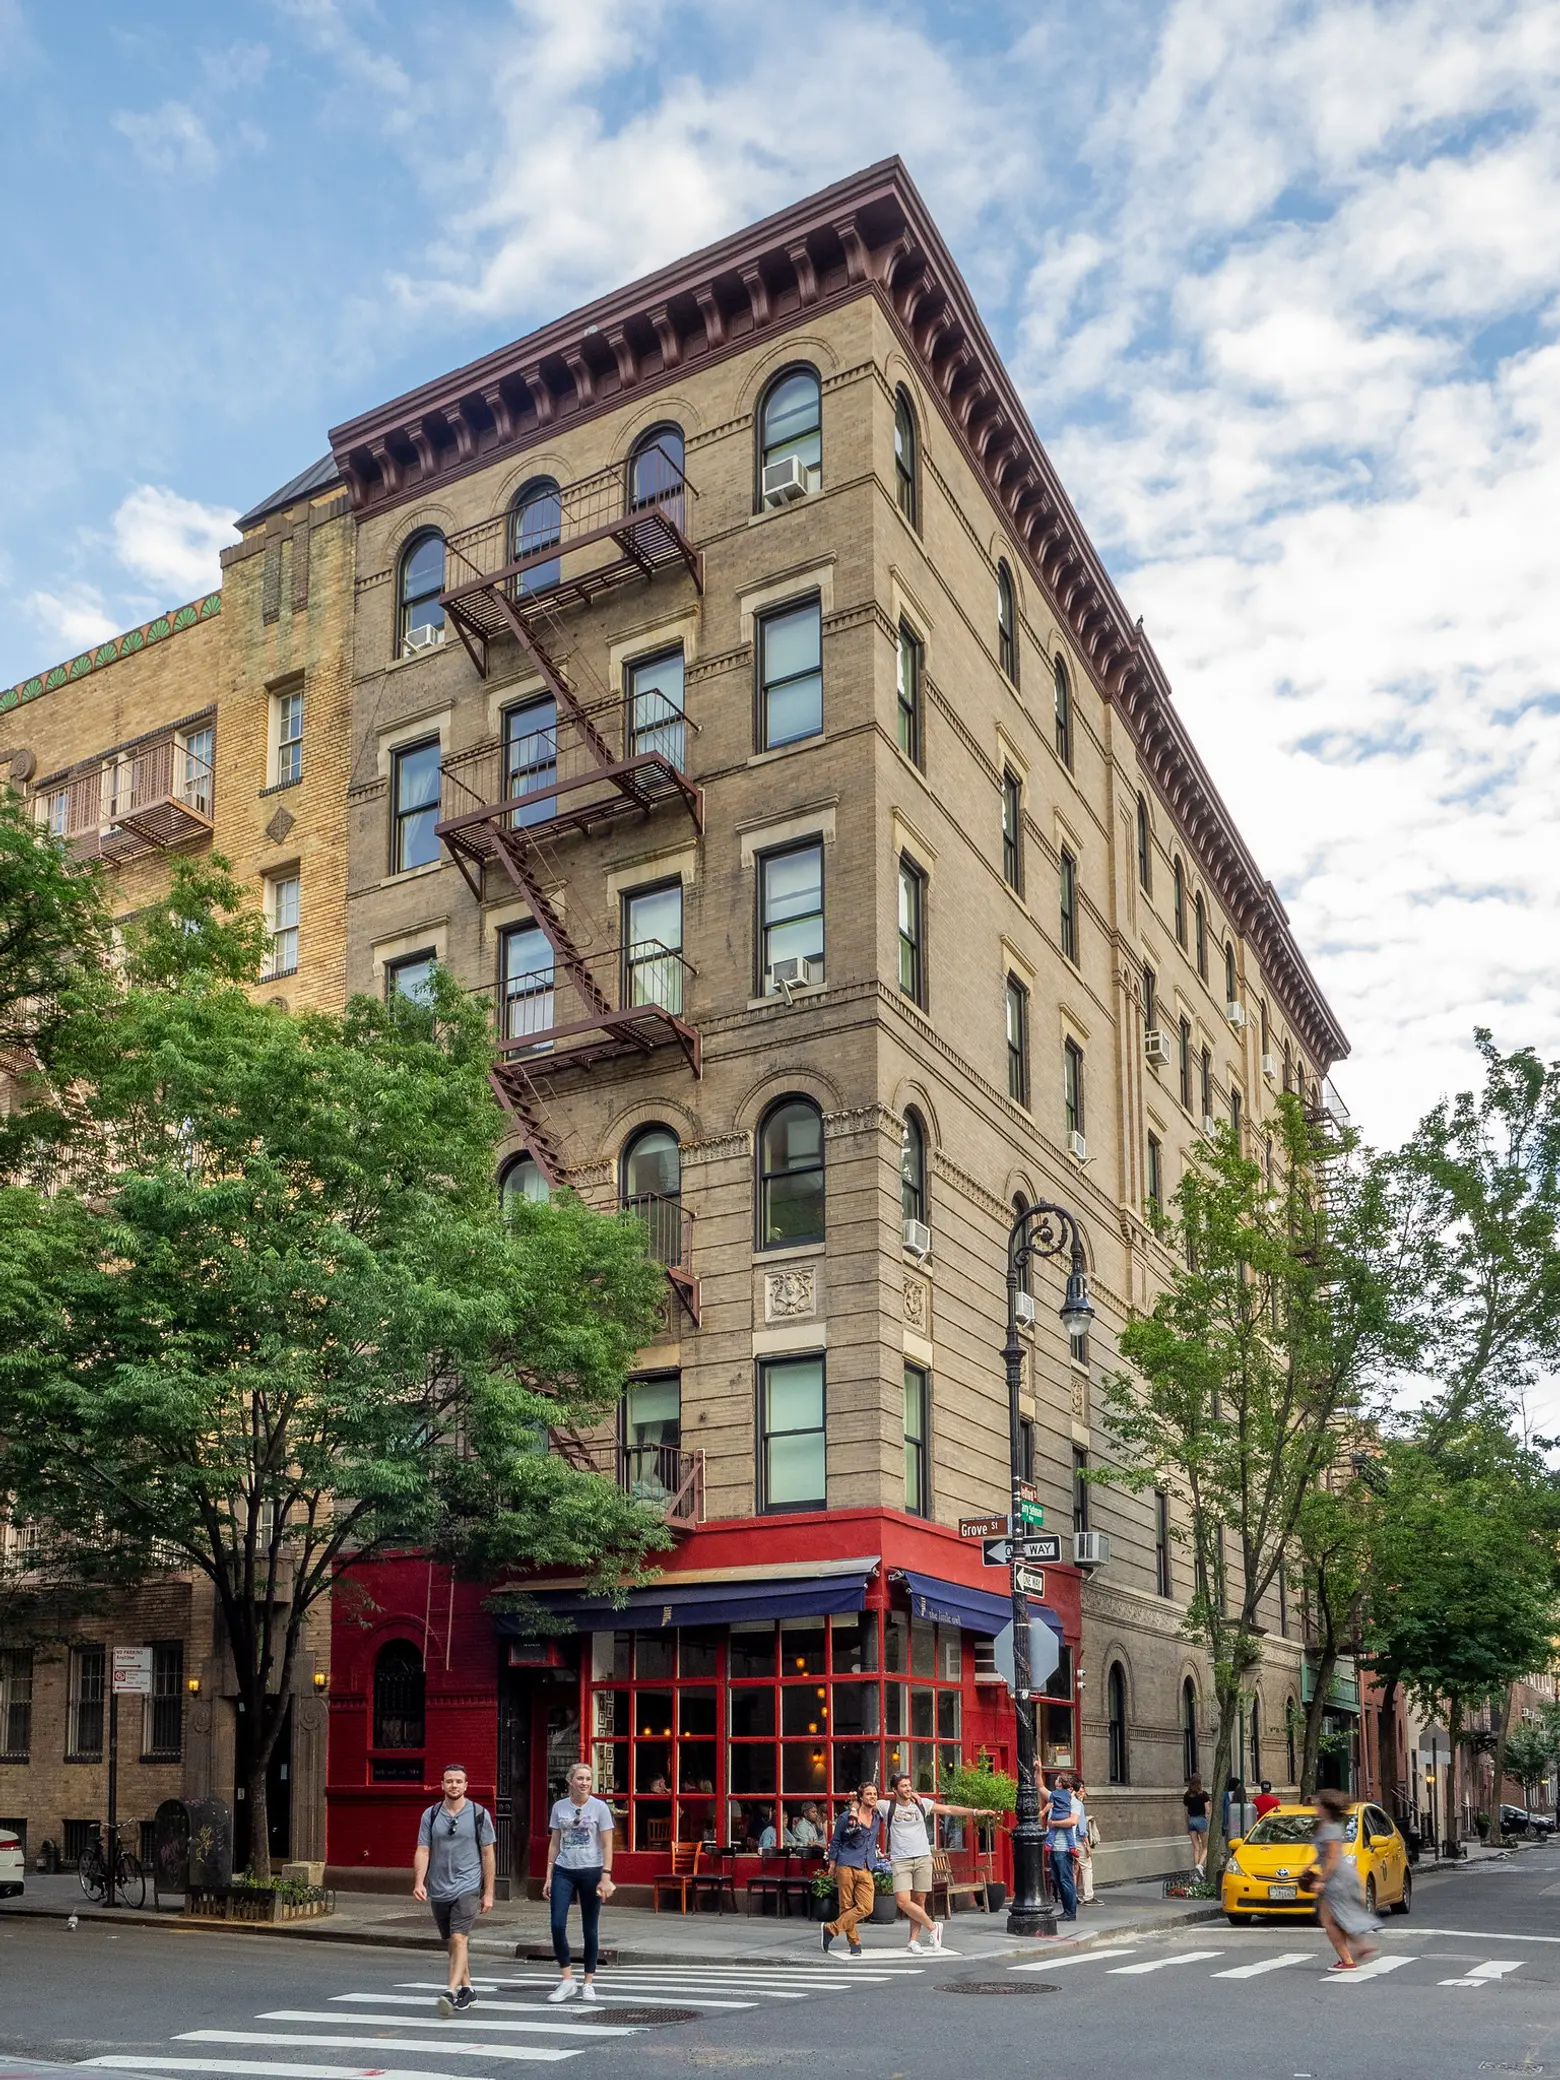 ▷Where to see the Friends apartment building in NYC?